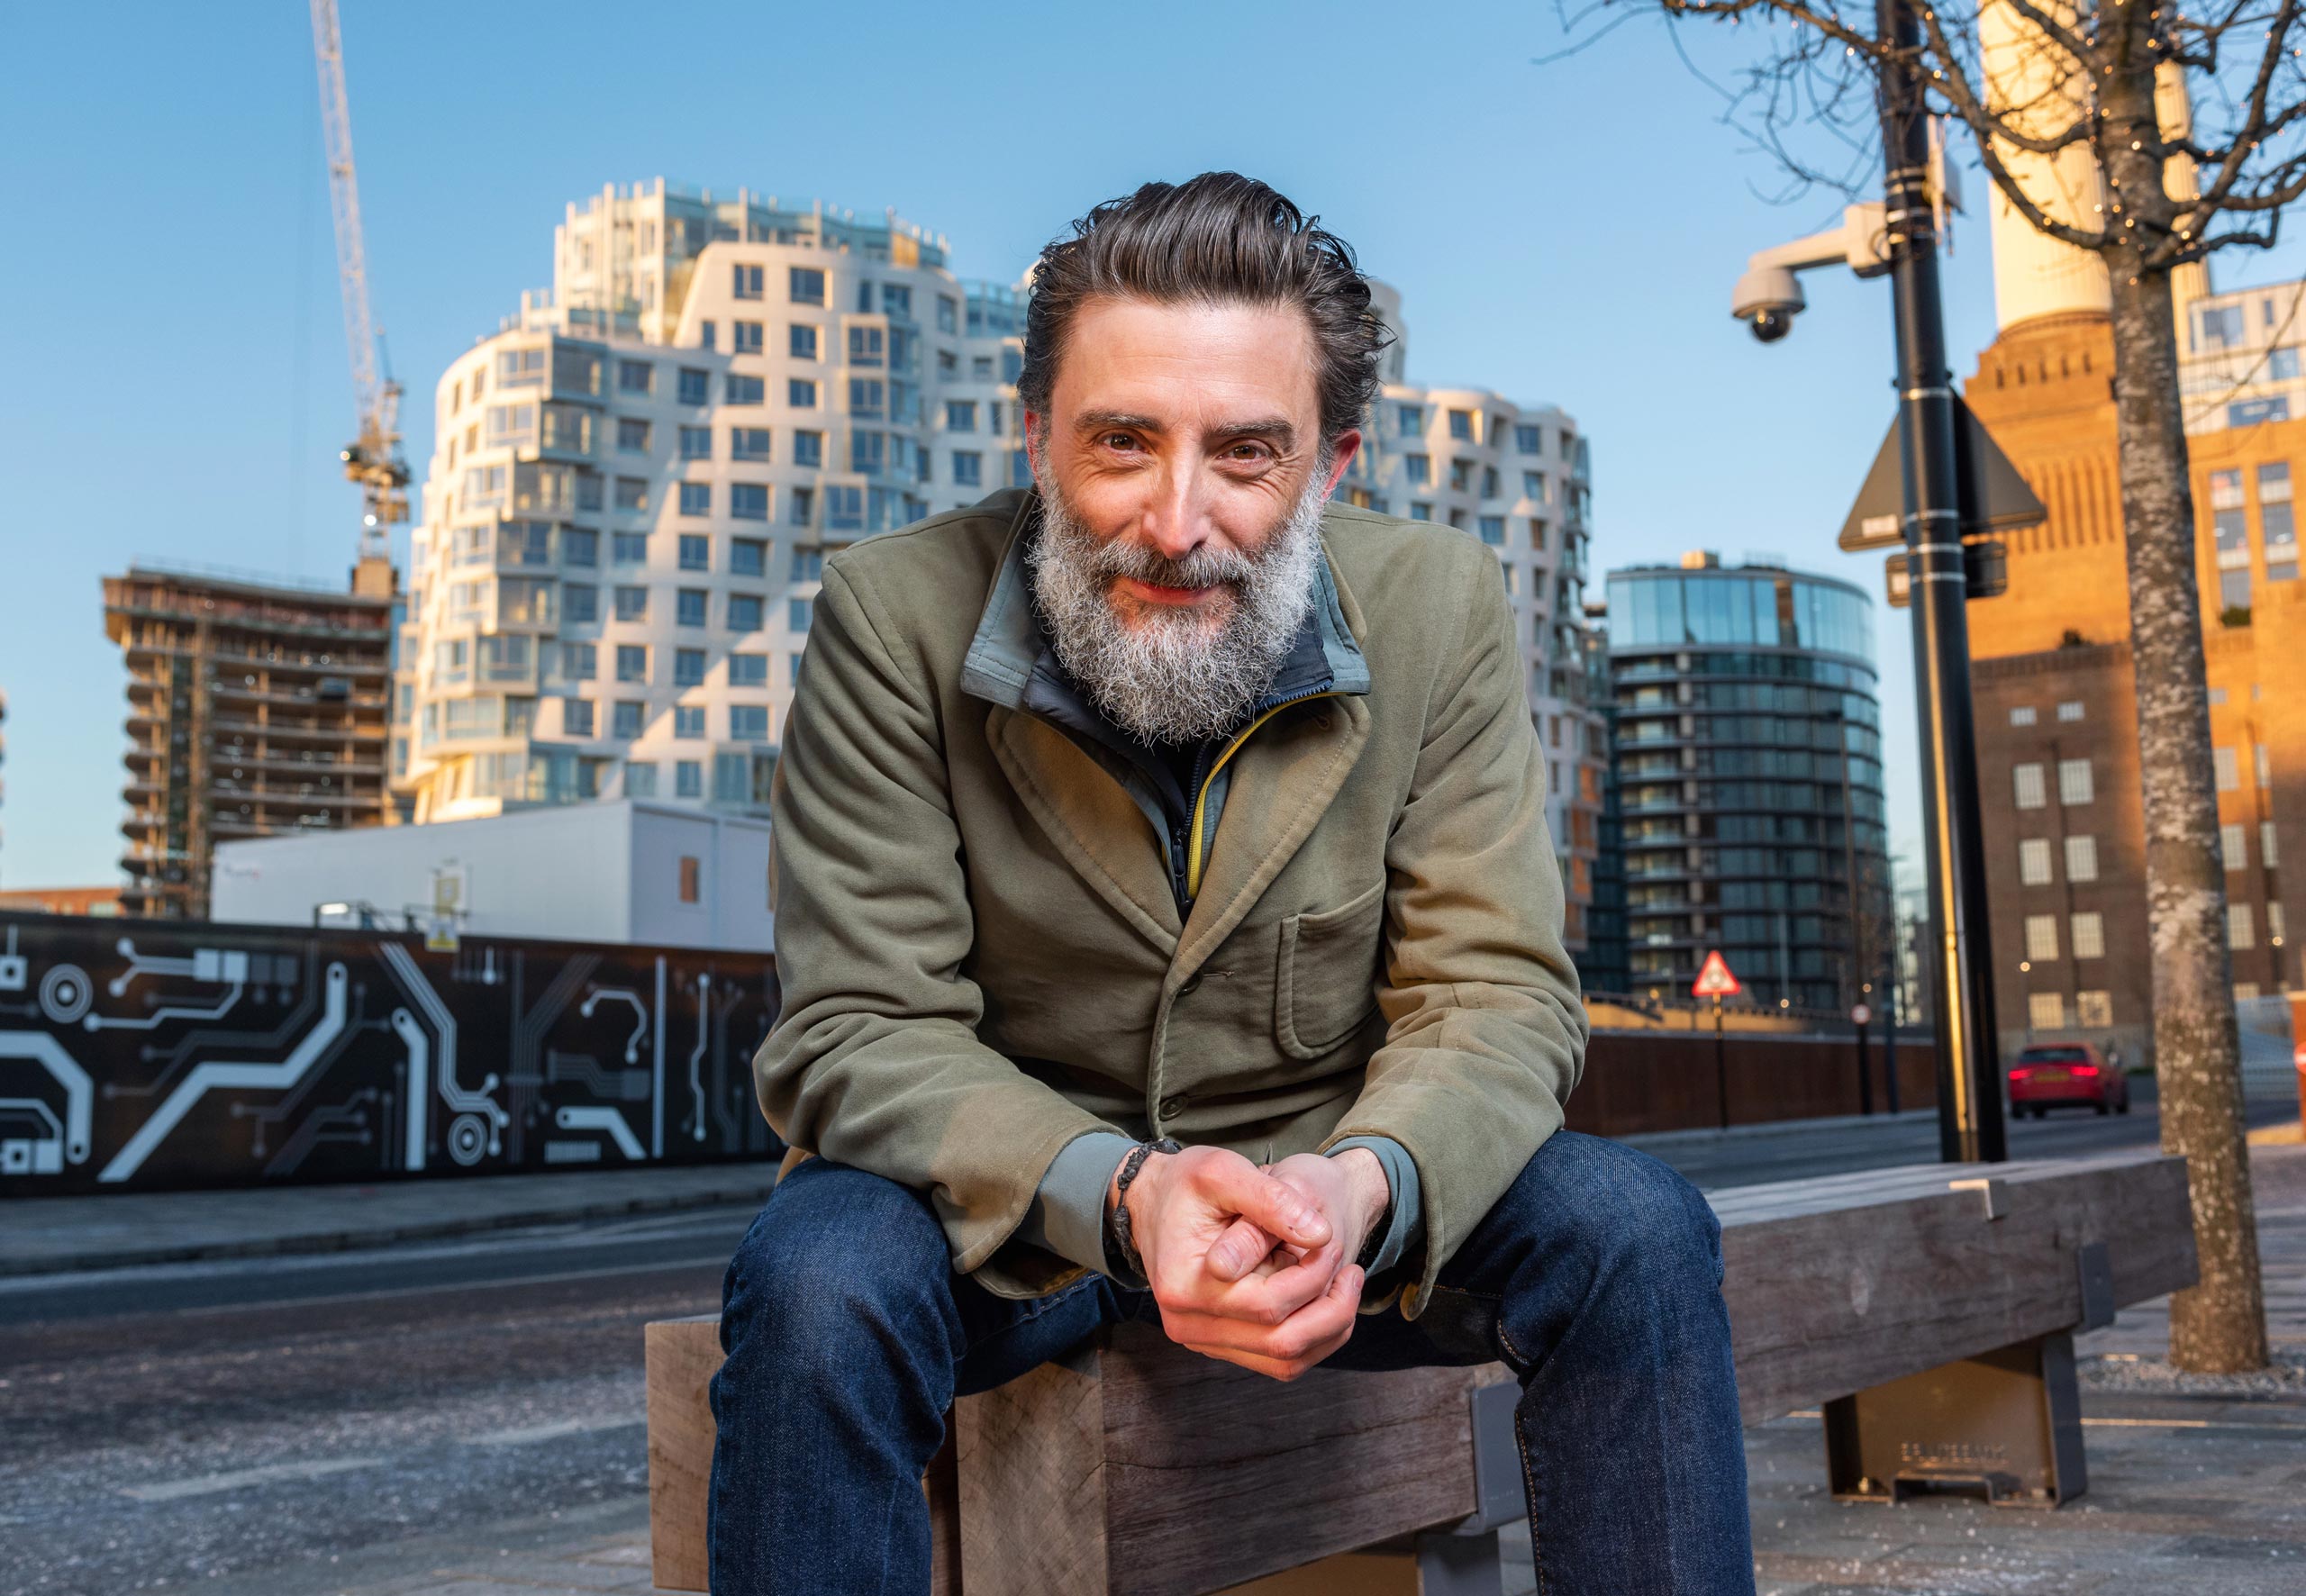 Contemporary business portrait of an architect sitting in a bustling street in London. Dressed in casual attire, he exudes confidence and expertise in his field while maintaining a relaxed and approachable demeanor. The city's iconic architecture serves as a fitting backdrop for this image of a successful professional.